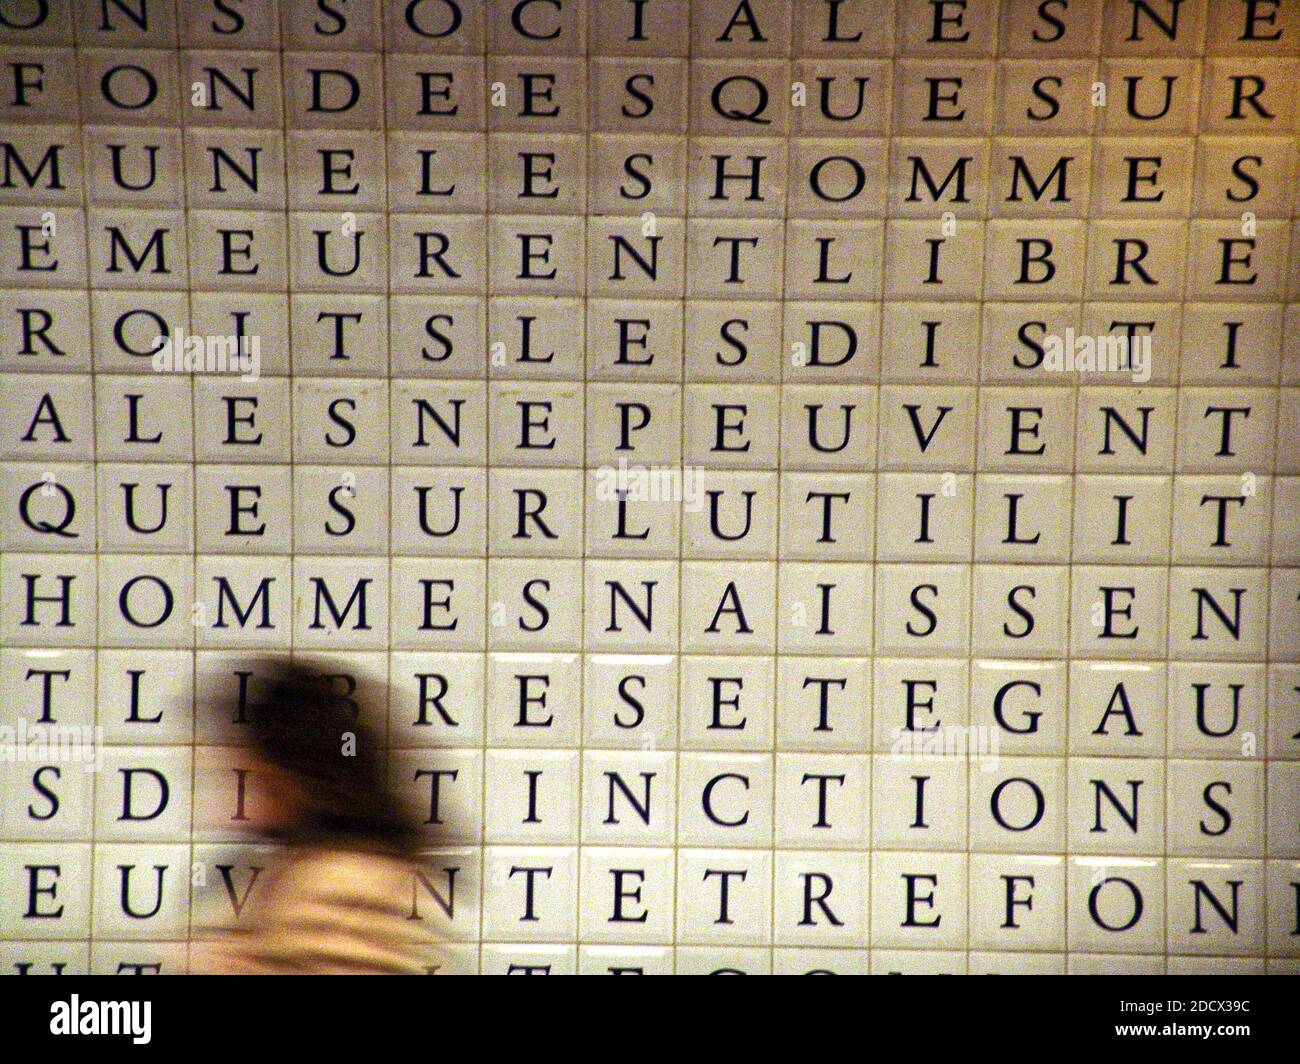 DECLARATION OF HUMAN AND CITIZEN RIGHTS WRITTEN ON THE TILES OF THE CONCORDE METRO STATION IN PARIS FRANCE - FRENCH HISTORY - PARIS METRO - PARIS TRANSPORT © F.BEAUMONT Stock Photo